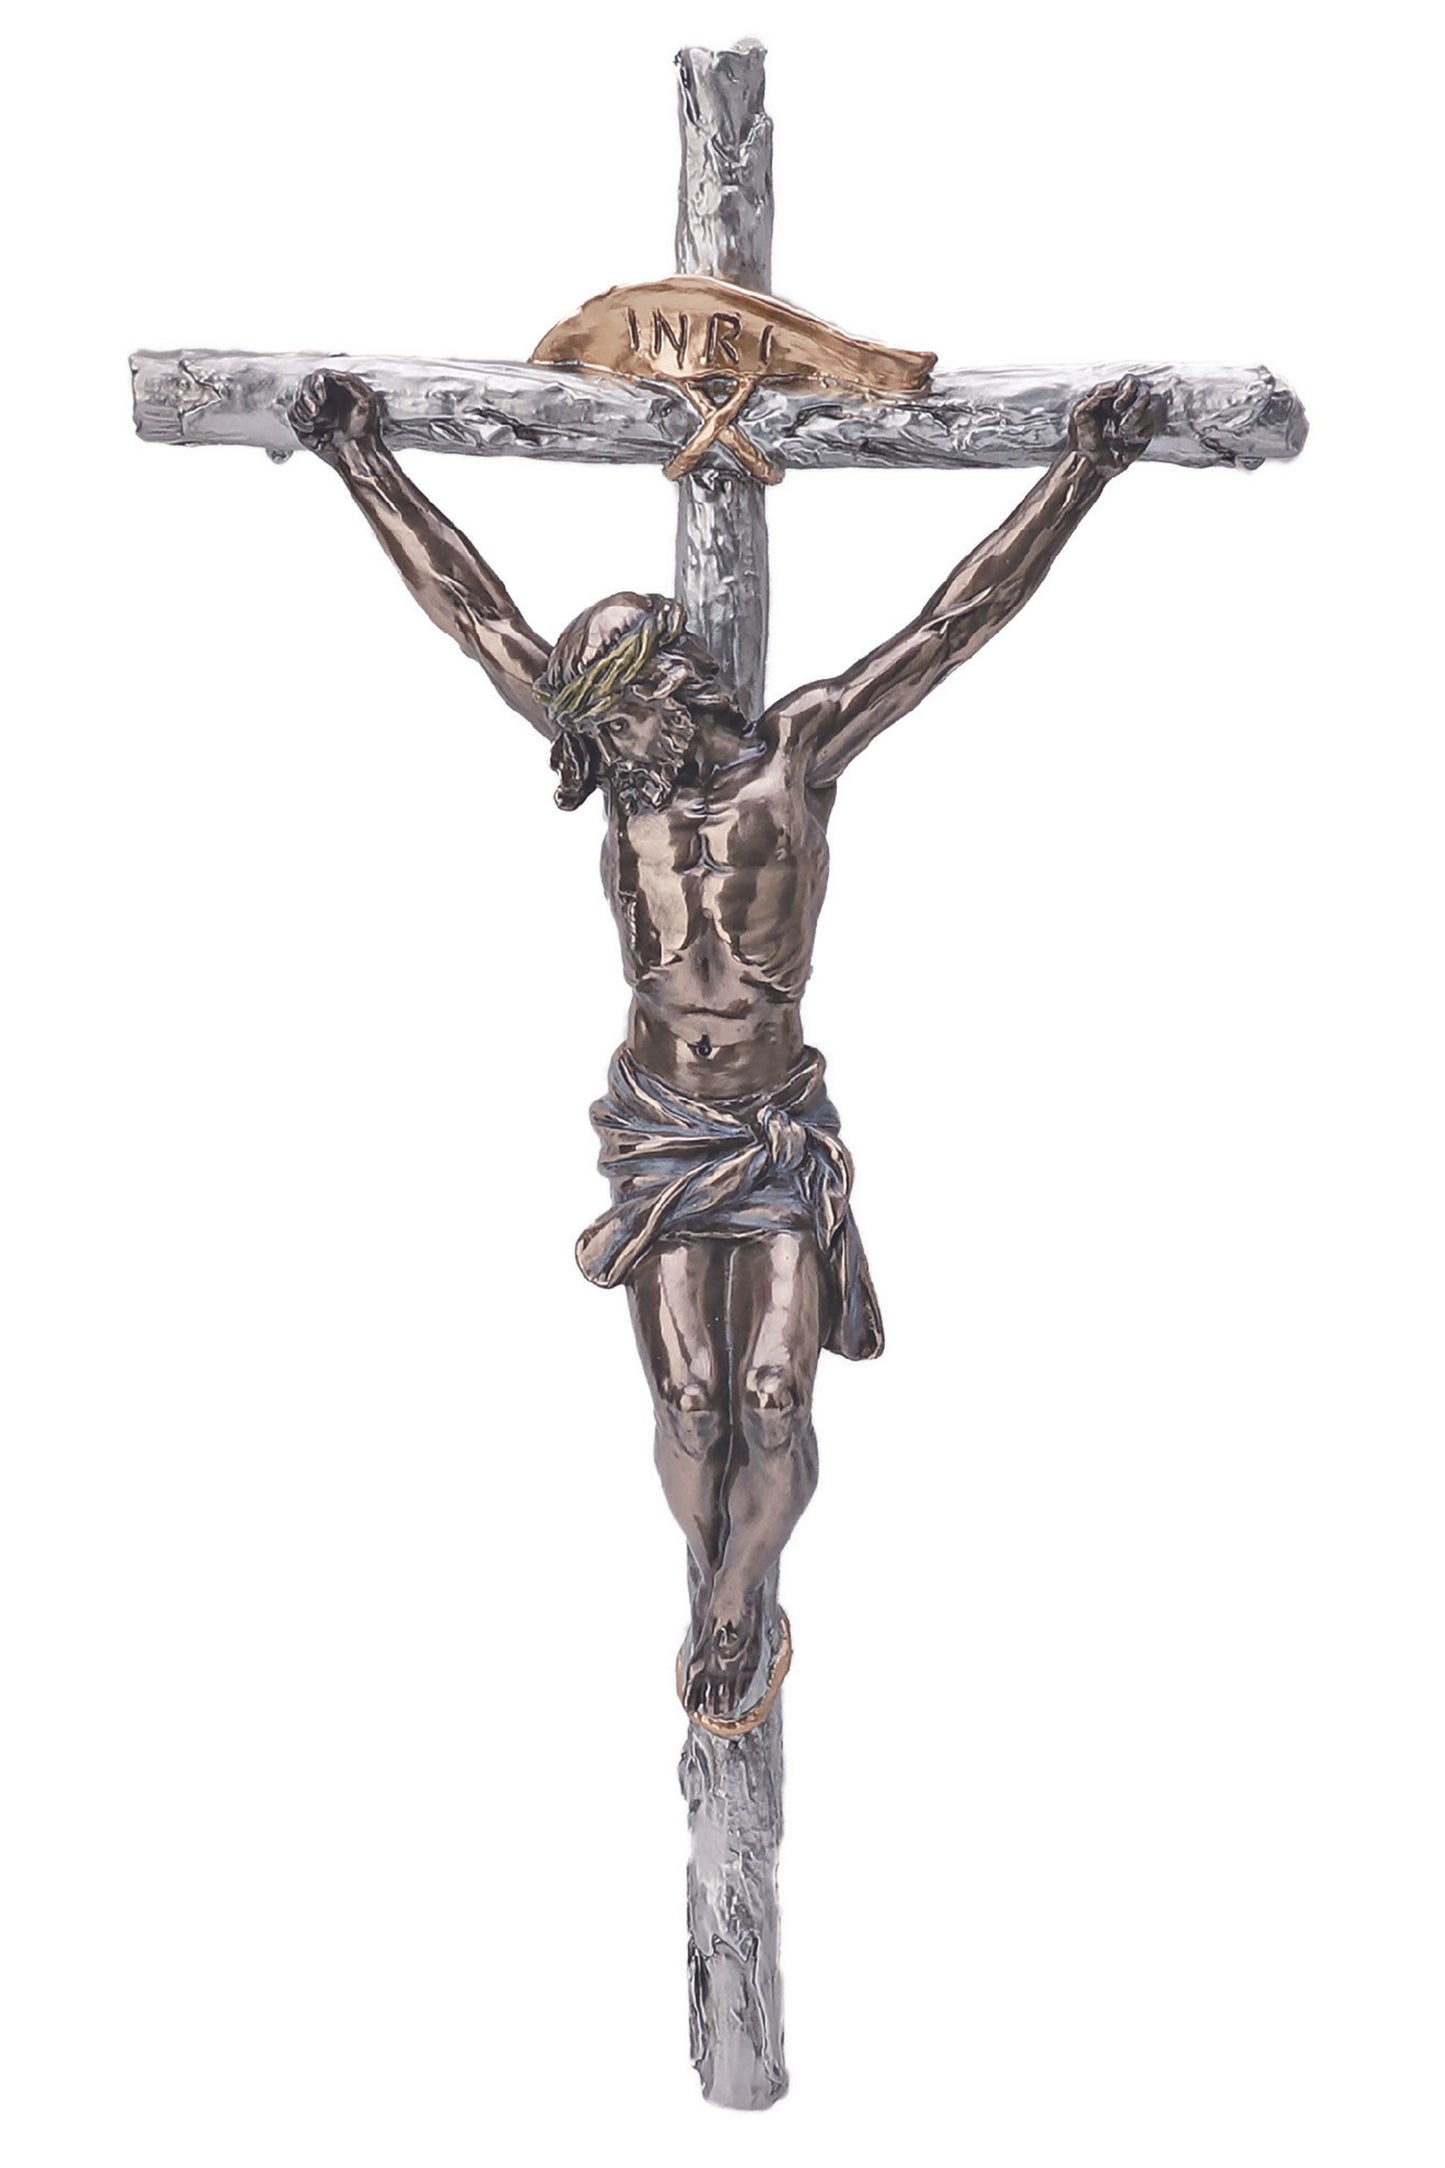 SR-72690-PB Crucifix in Pewter Style/Cold Cast Bronze 16"